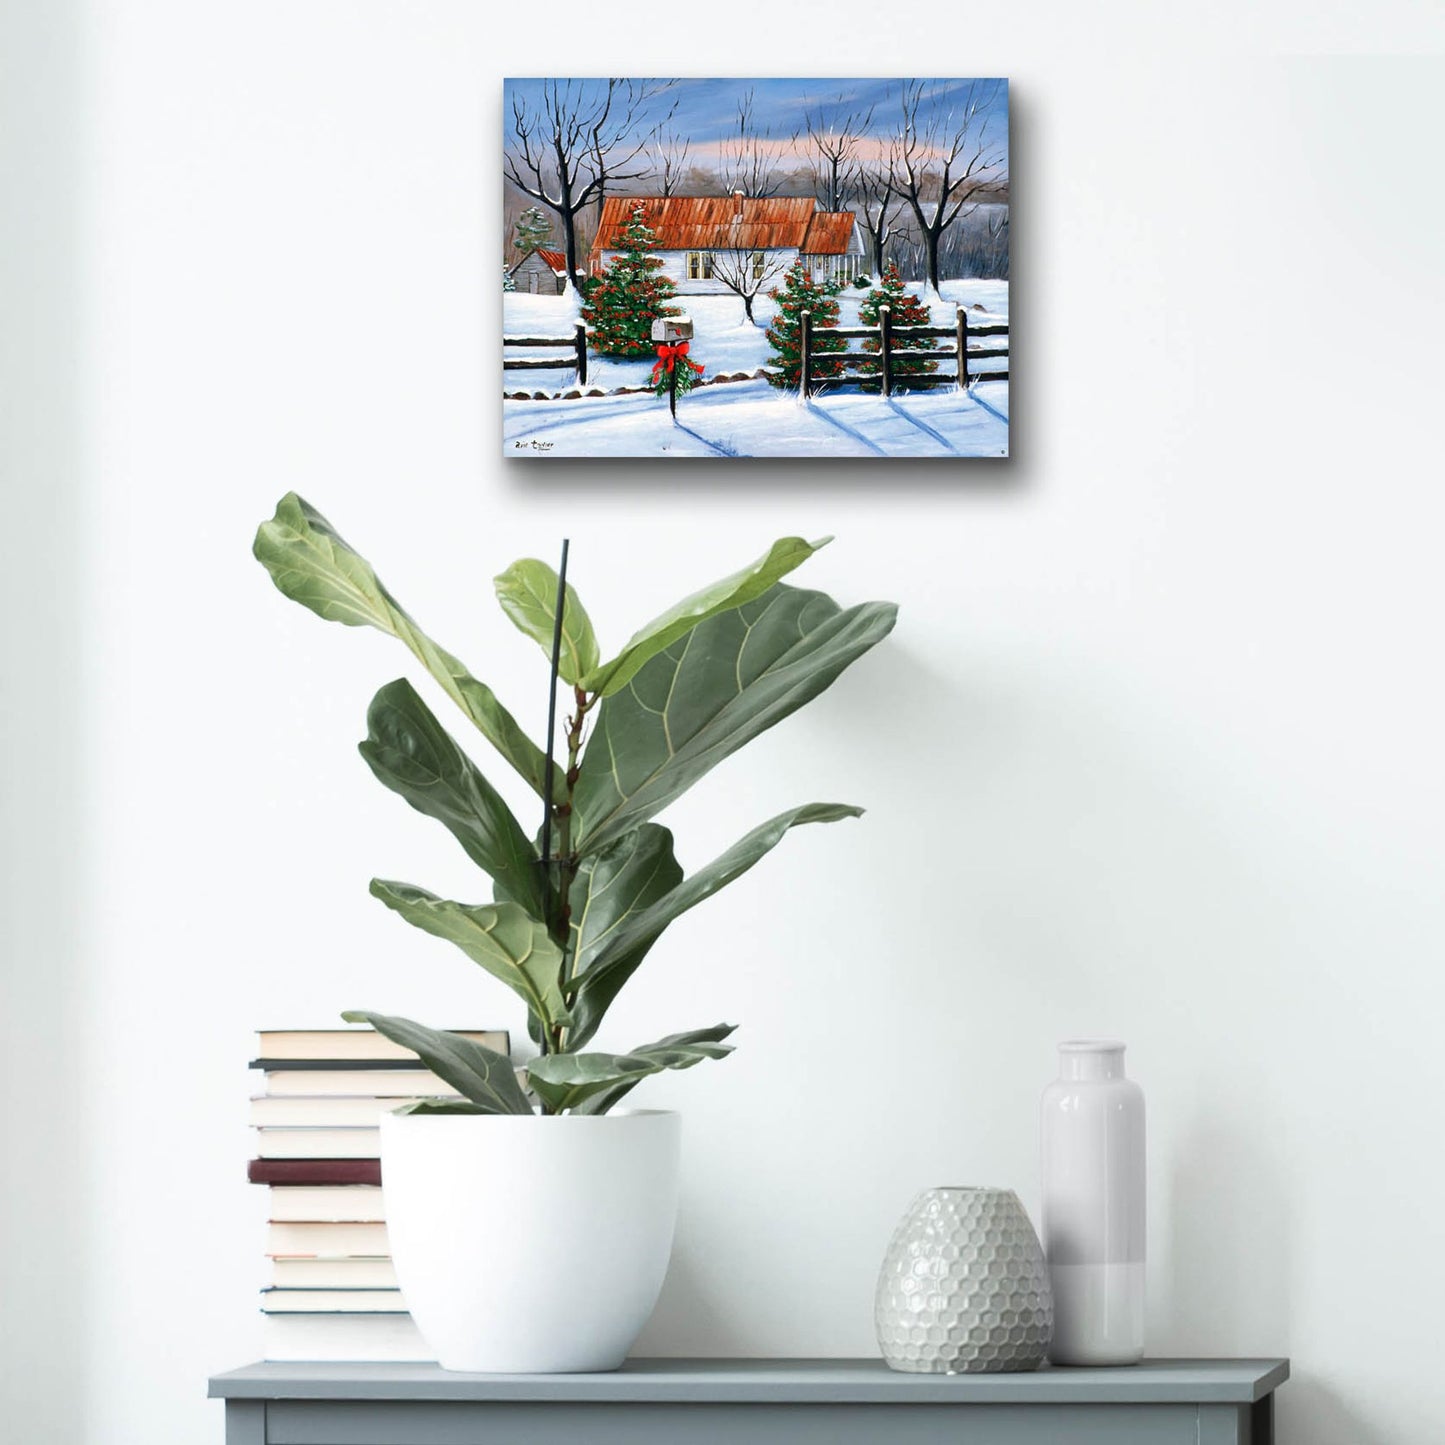 Epic Art 'Mom and Dad's at Christmas' by Arie Reinhardt Taylor, Acrylic Glass Wall Art,16x12